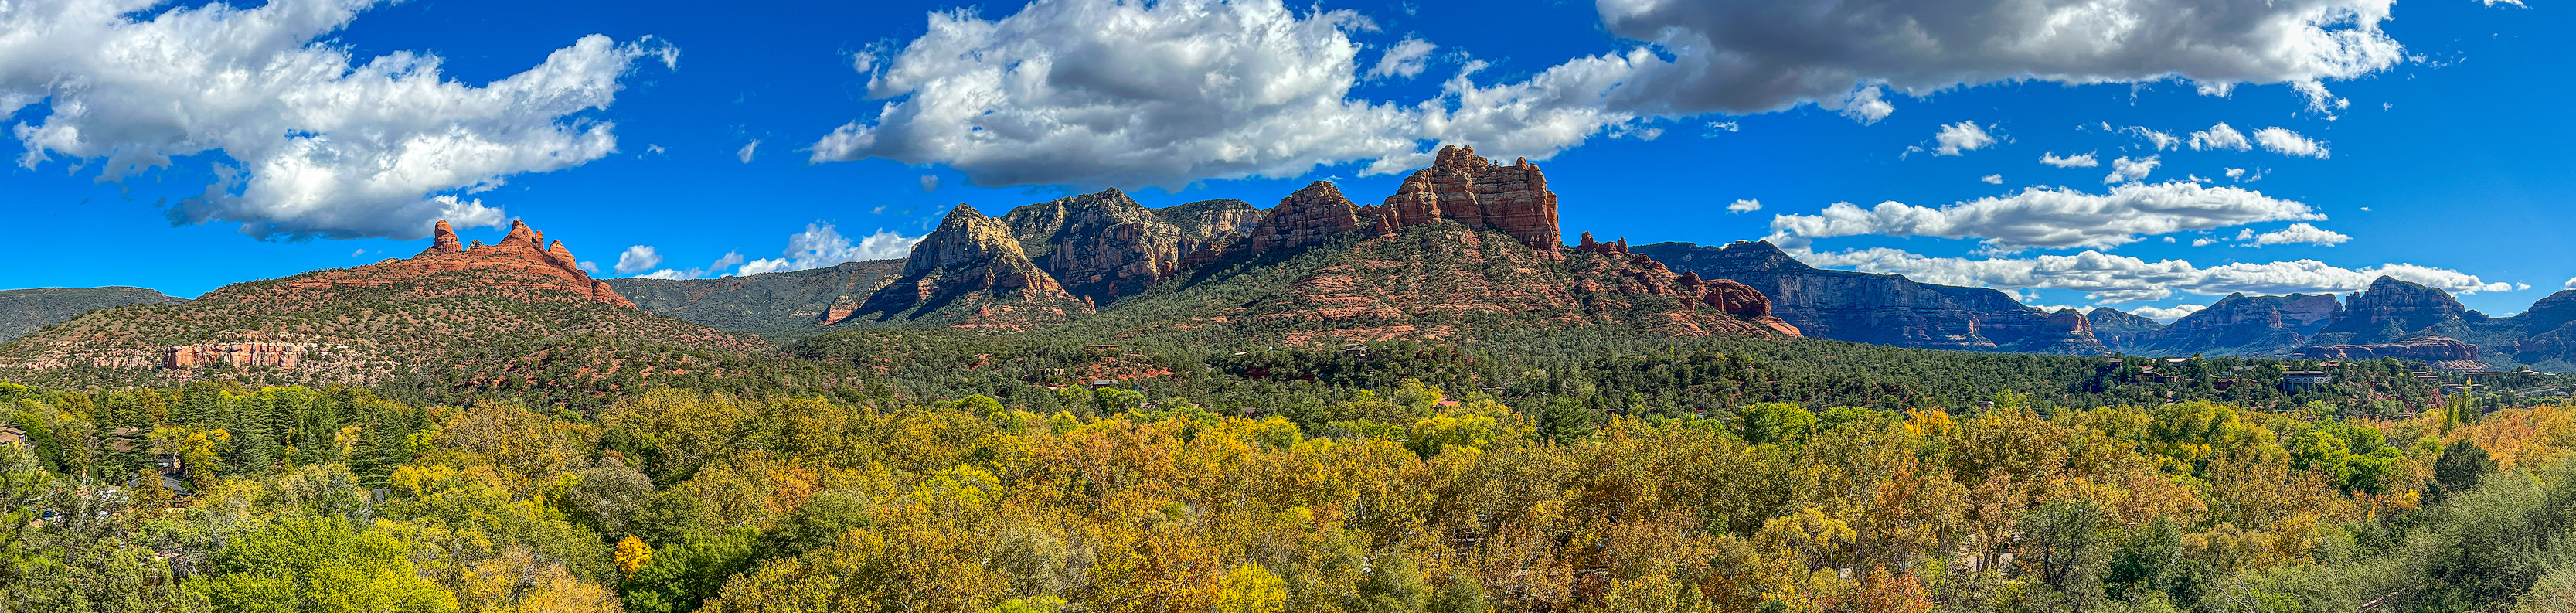 Sedona With Clouds